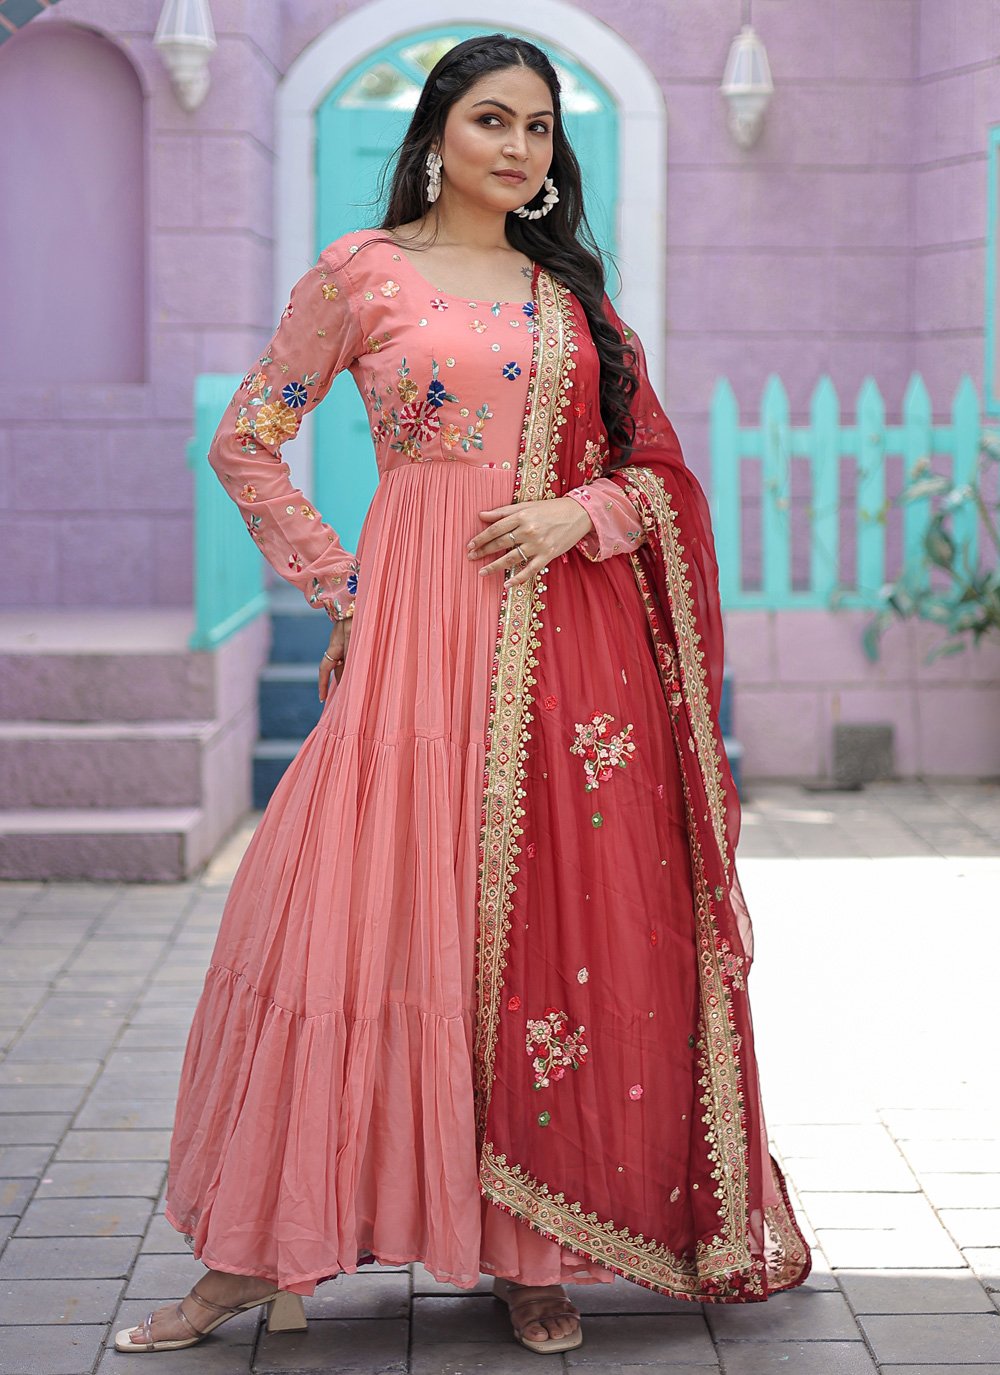 Peach Gown by Sandali Kapoor #engagement #gowns #indian #peaches Long Trail Gown  peach colour Indian style gown… | Peach gown, Indian bridal dress,  Engagement gowns